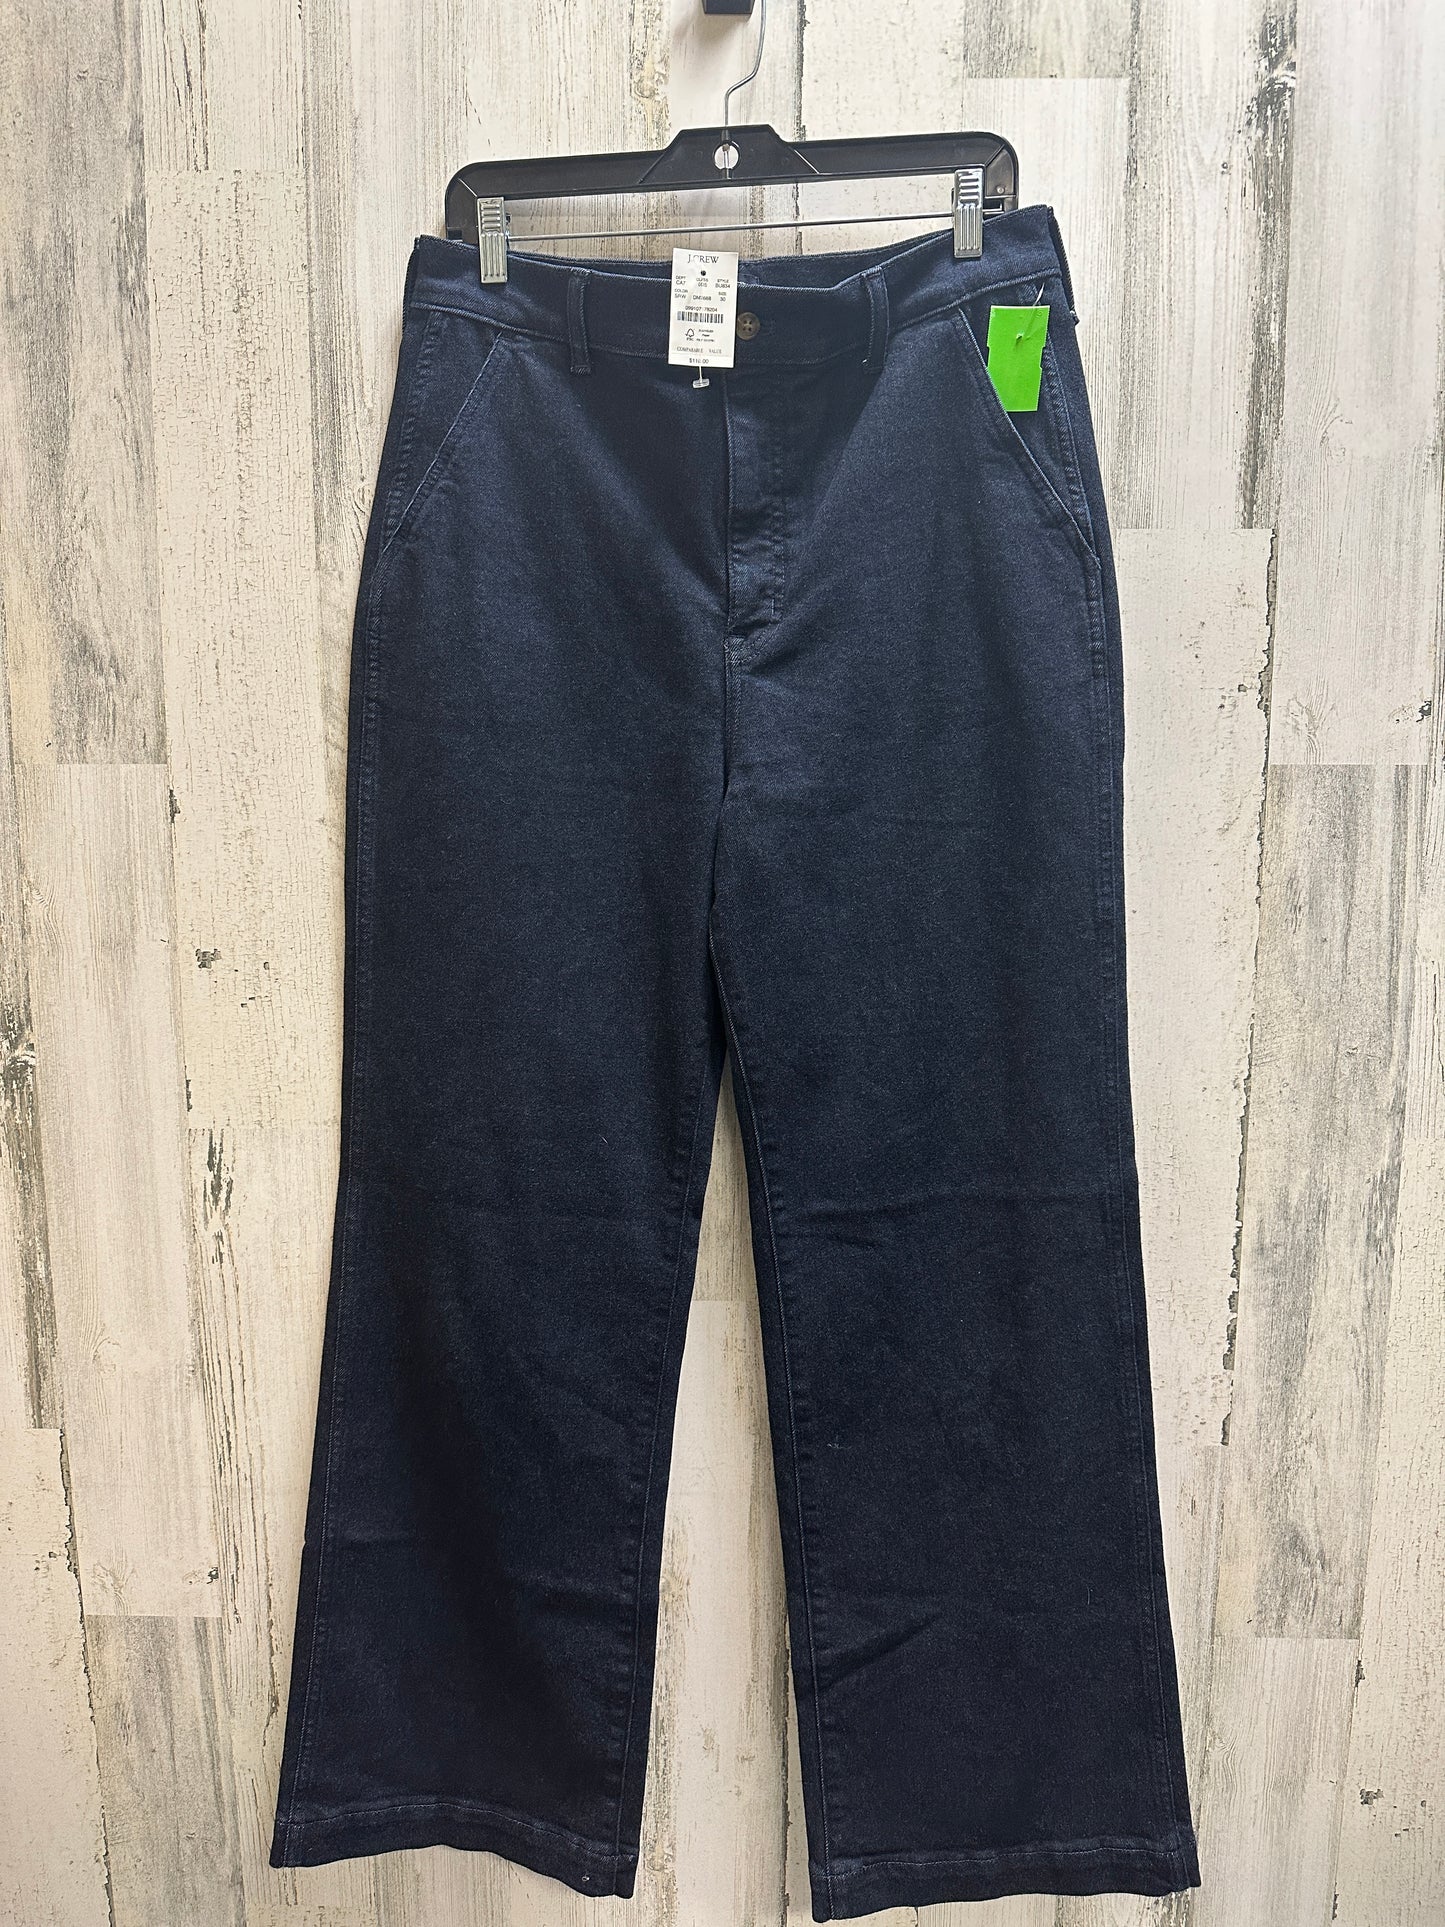 Jeans Boot Cut By J Crew  Size: 10